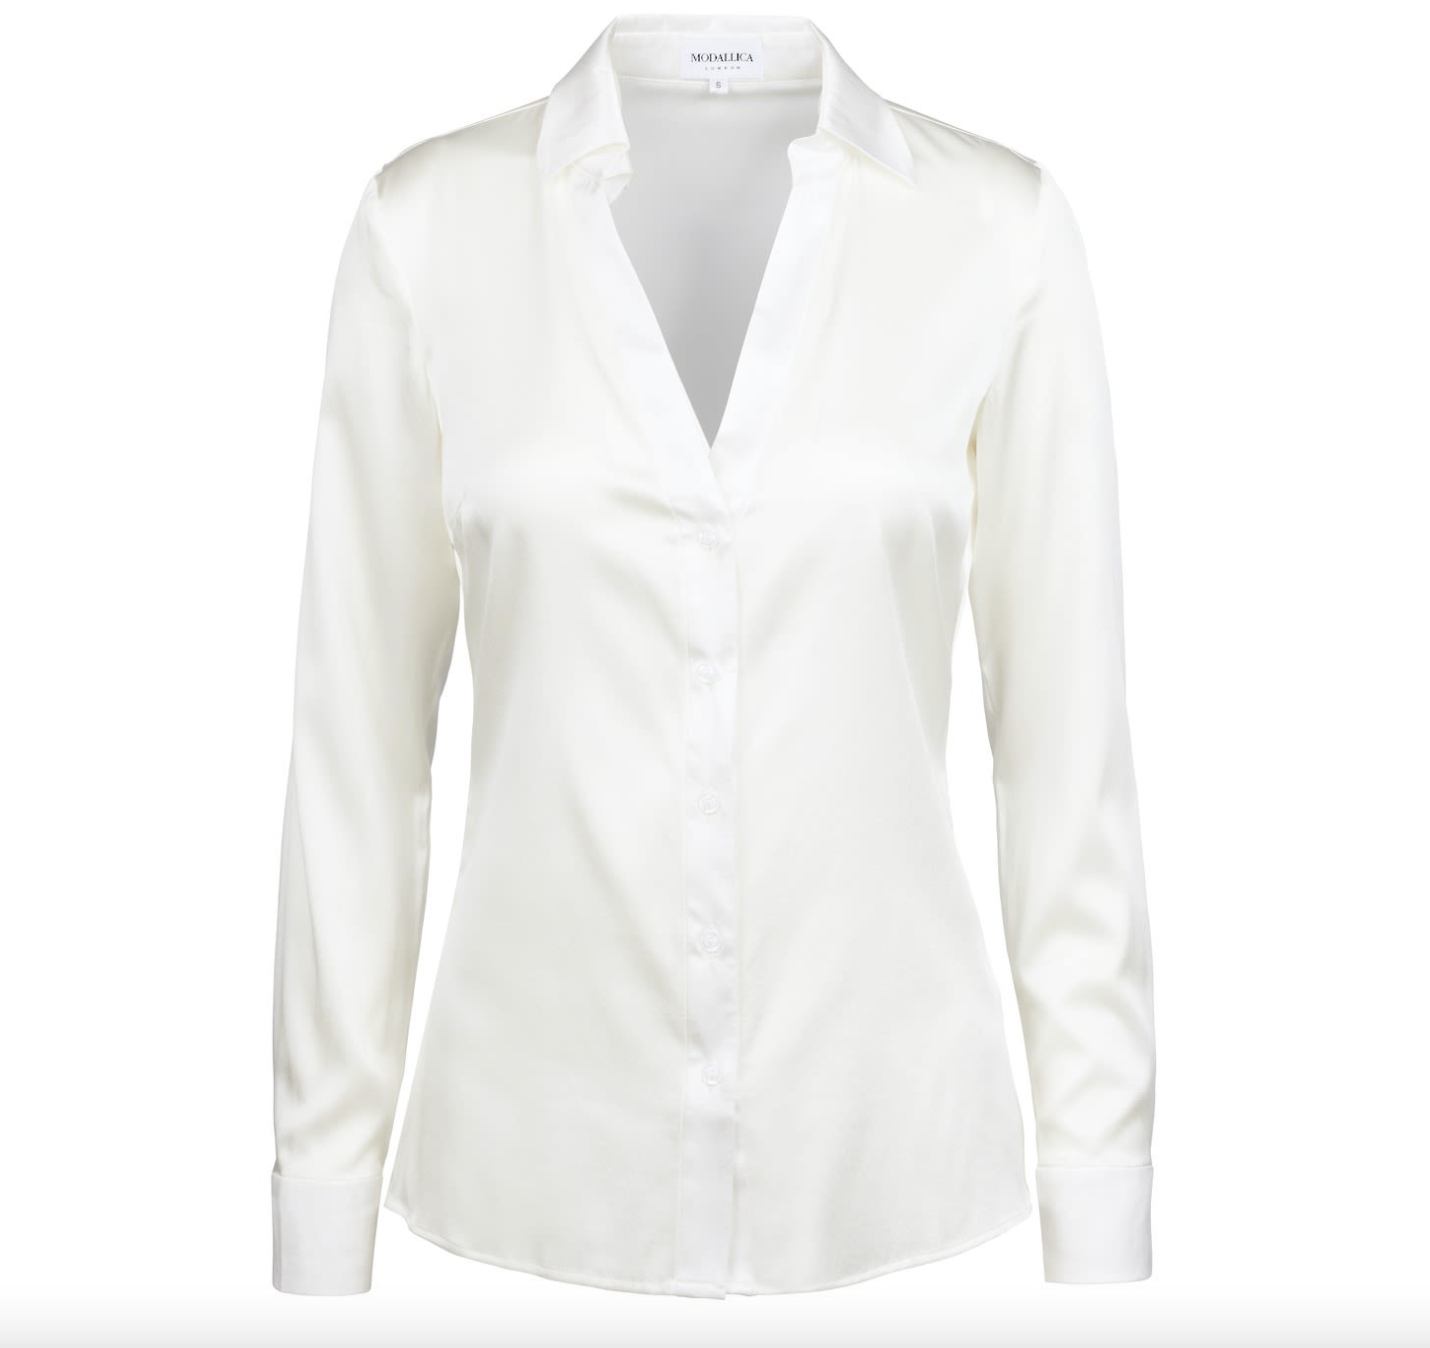 ORGANIC PEACE SILK FITTED SHIRT WITH OPEN CLEAVAGE